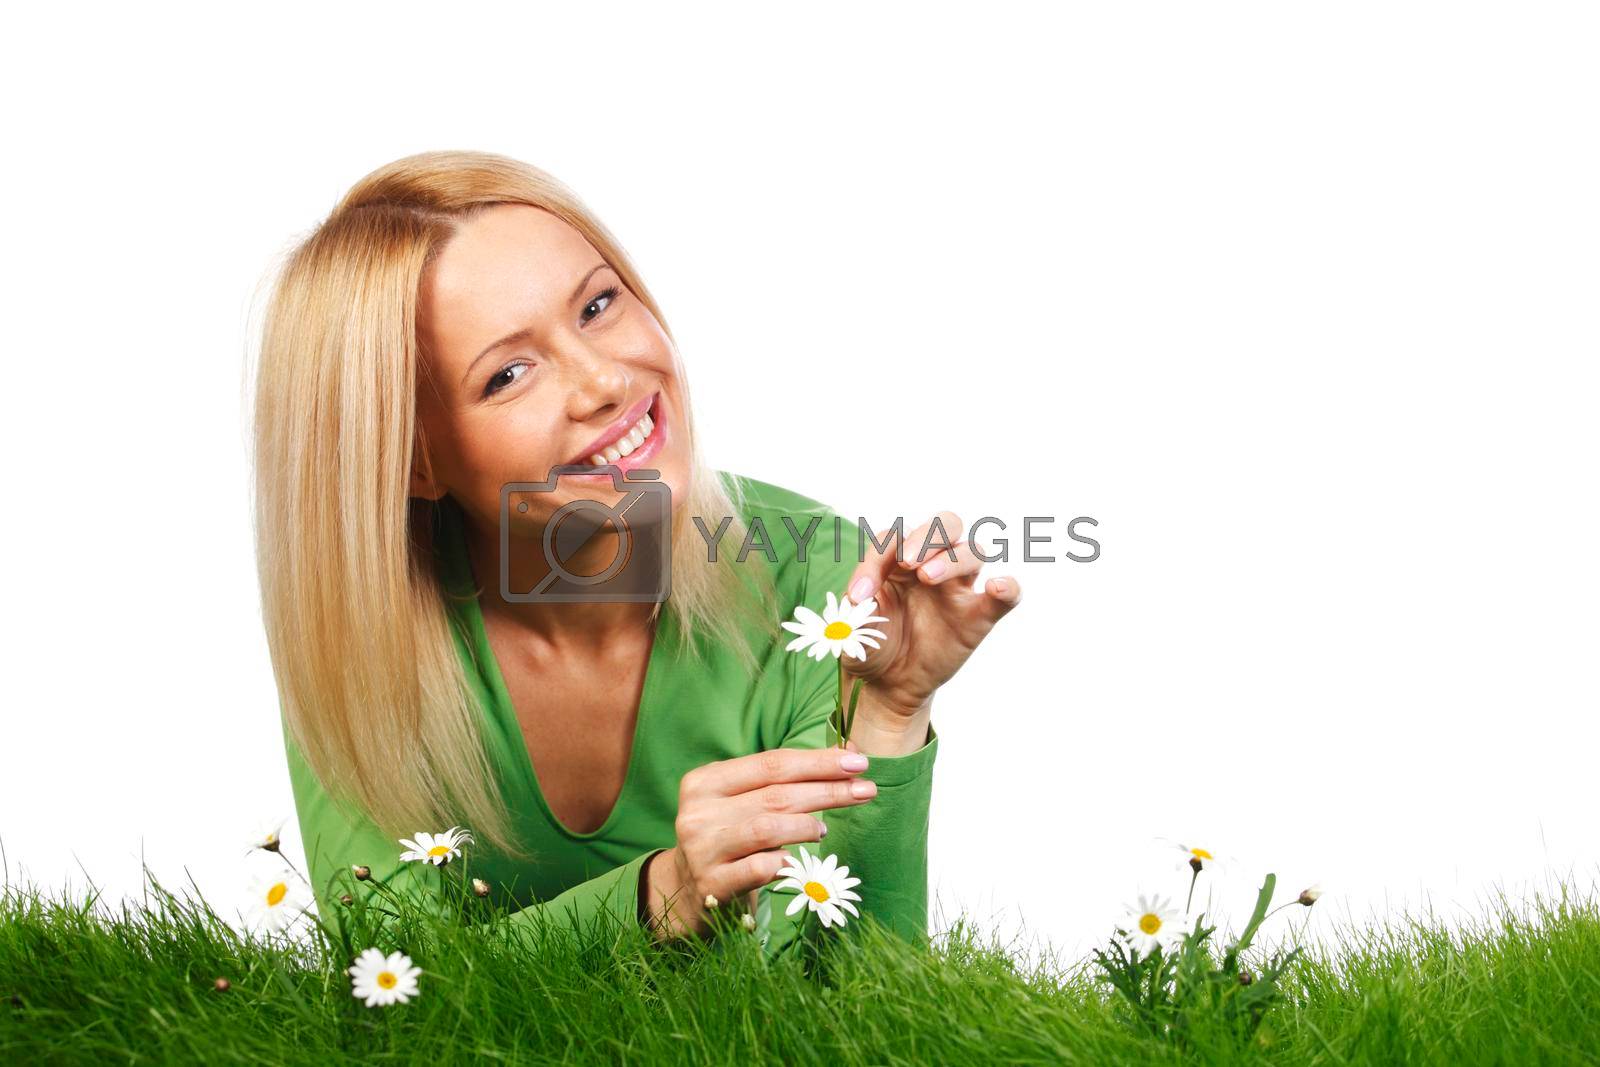 Royalty free image of Woman on grass with flowers by Yellowj